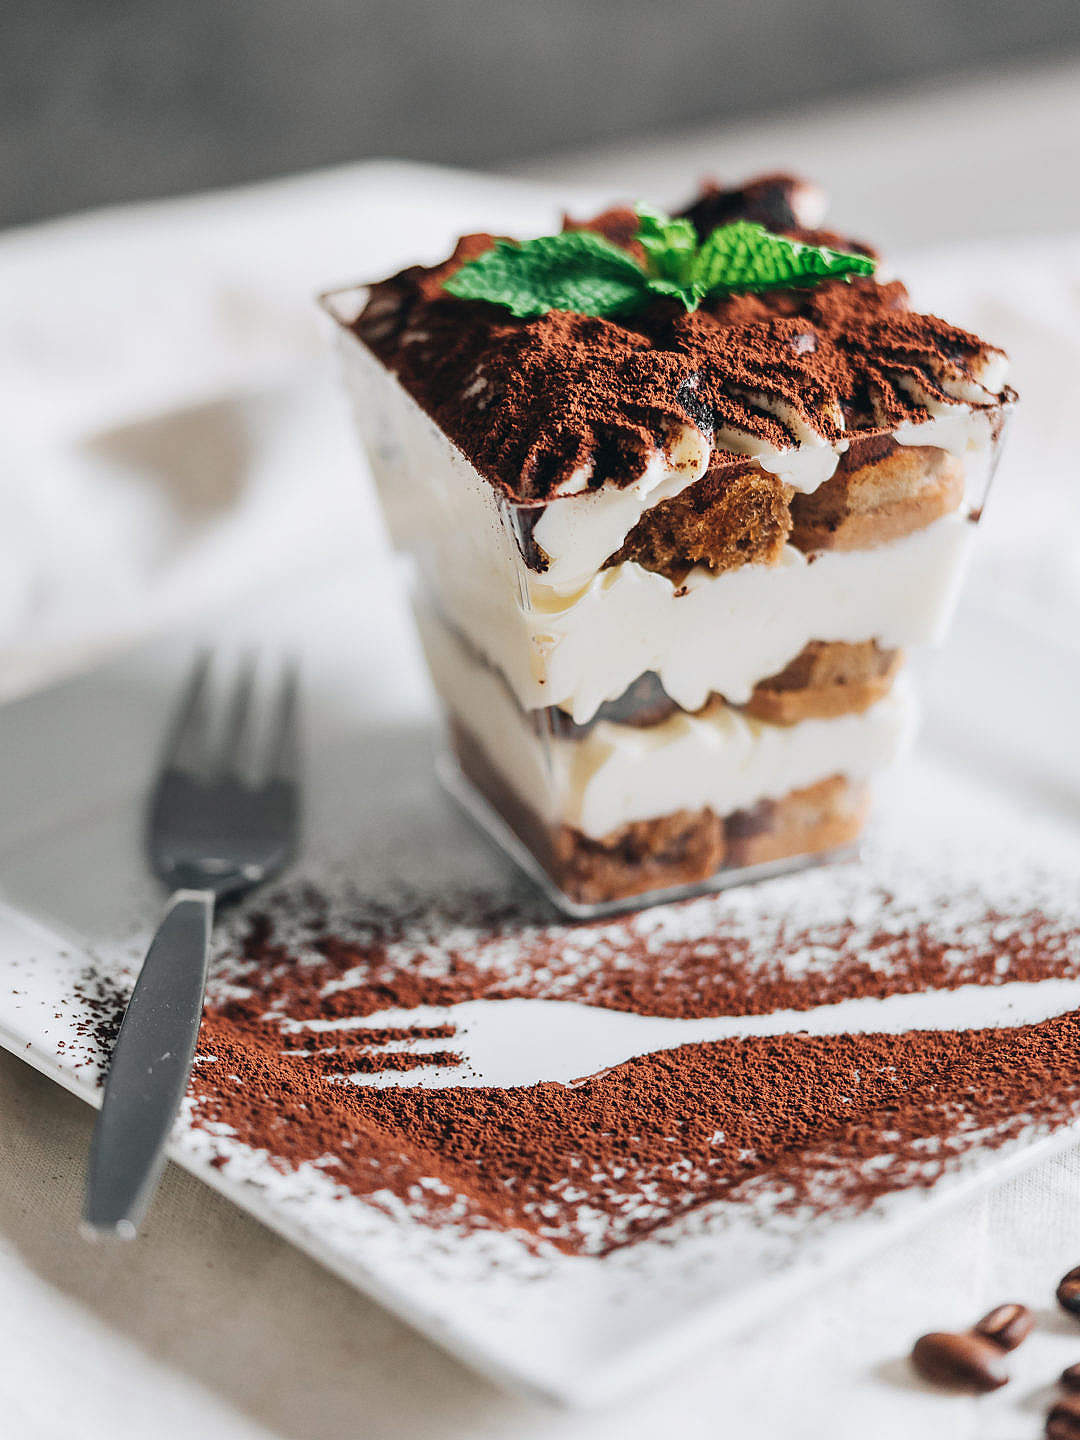 Download Tiramisu Served with Fork Outline Dusted with Cocoa Powder FREE Stock Photo